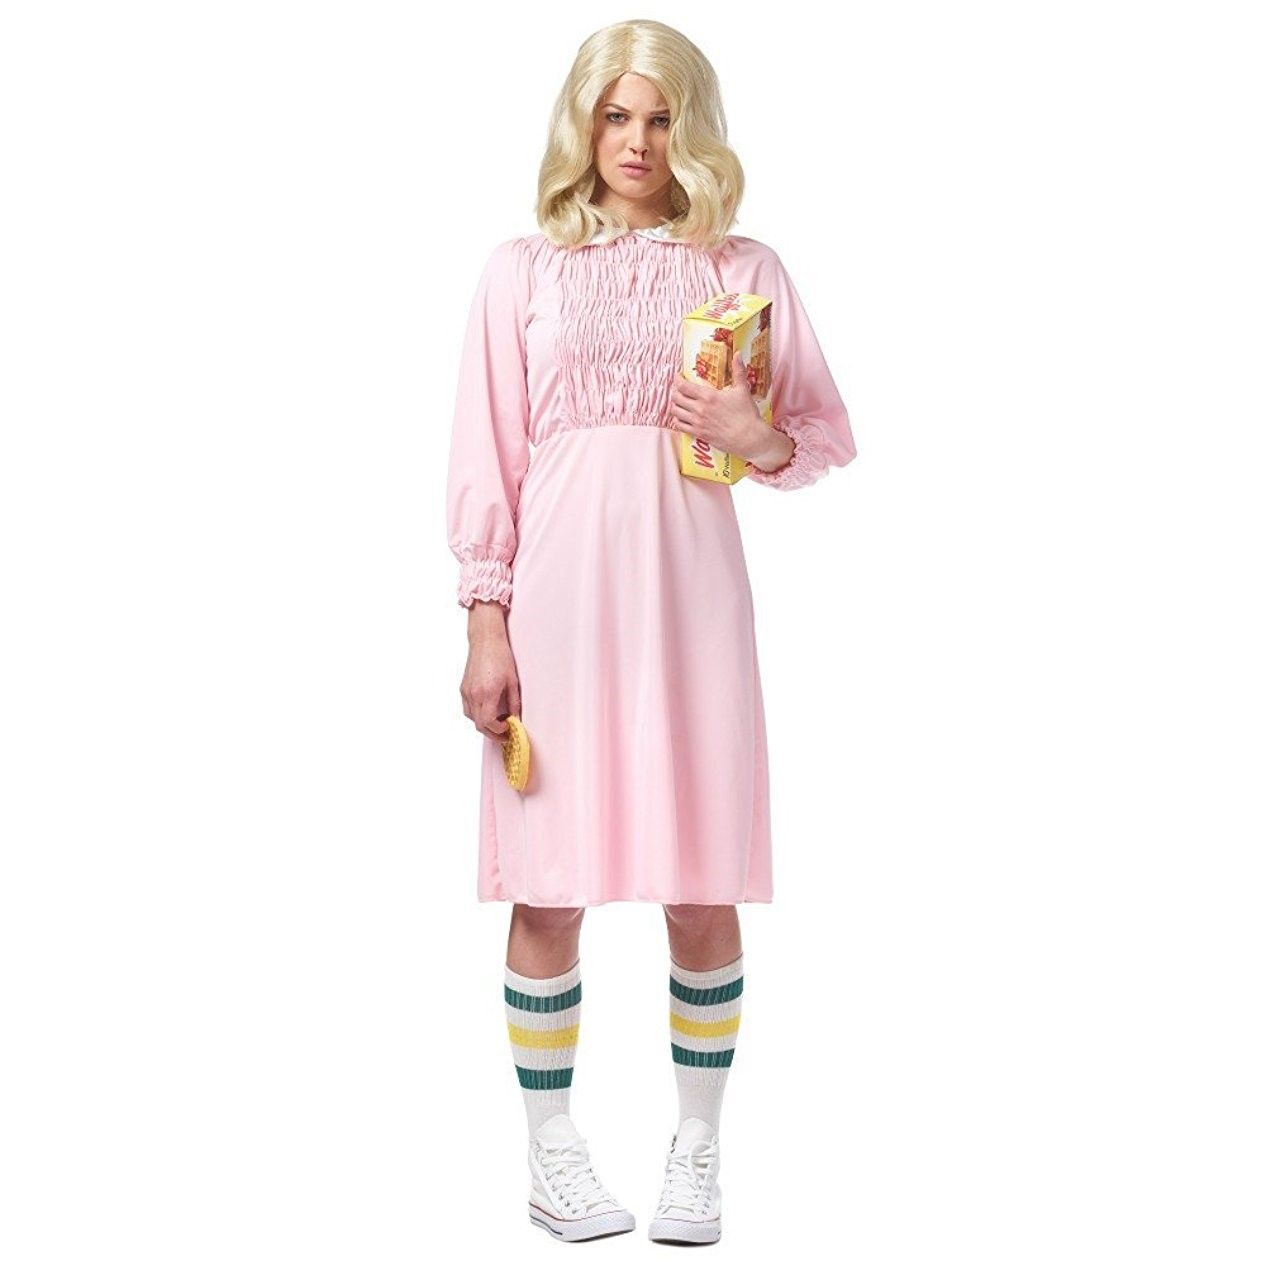 10 under-$55 costumes perfect for the lazy halloween participant